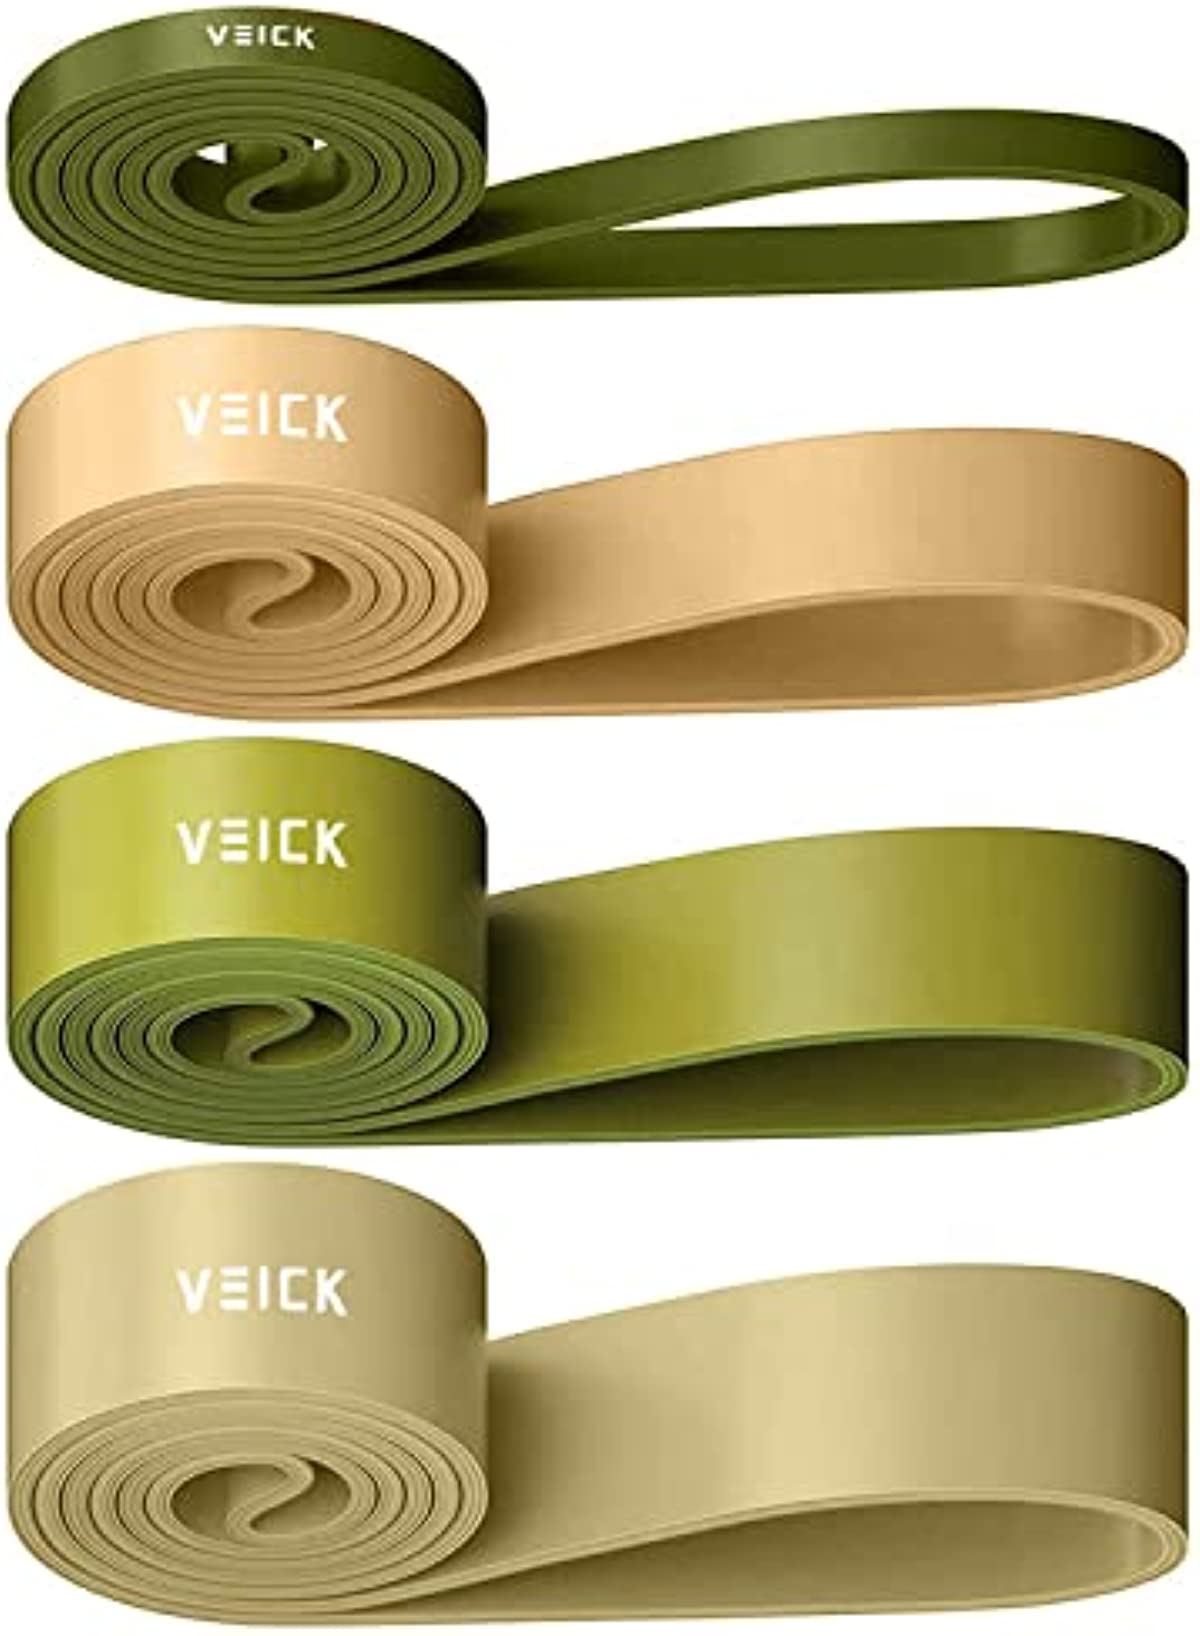 VEICK Resistance Bands, Pull Up Assistance Bands, Workout Exercise Bands, Long Resistance Bands Set for Men and Women, Elastic Bands for Stretch, Power Weighted Gyms at Home Fitness Equipment